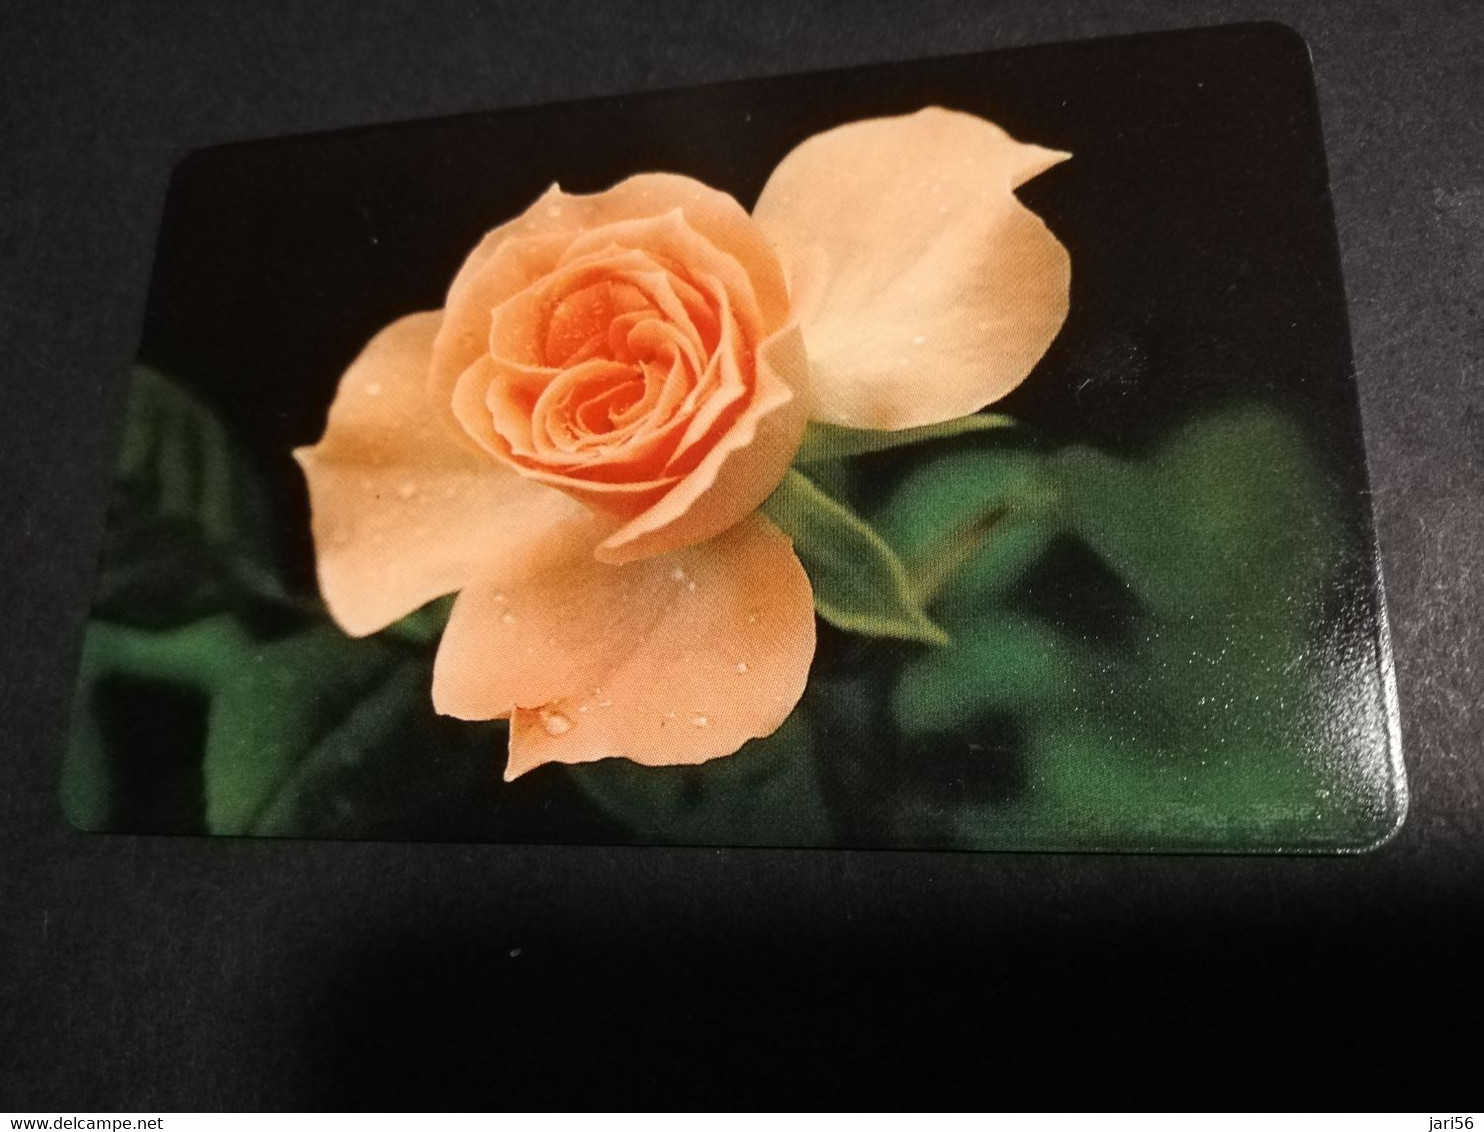 GREAT BRETAGNE  CHIPCARDS / TRIAL CARD 10 POUND   4438 BT / BACKSIDE ROSE /FLOWER PERFECT  CONDITION      **4454** - BT Algemeen